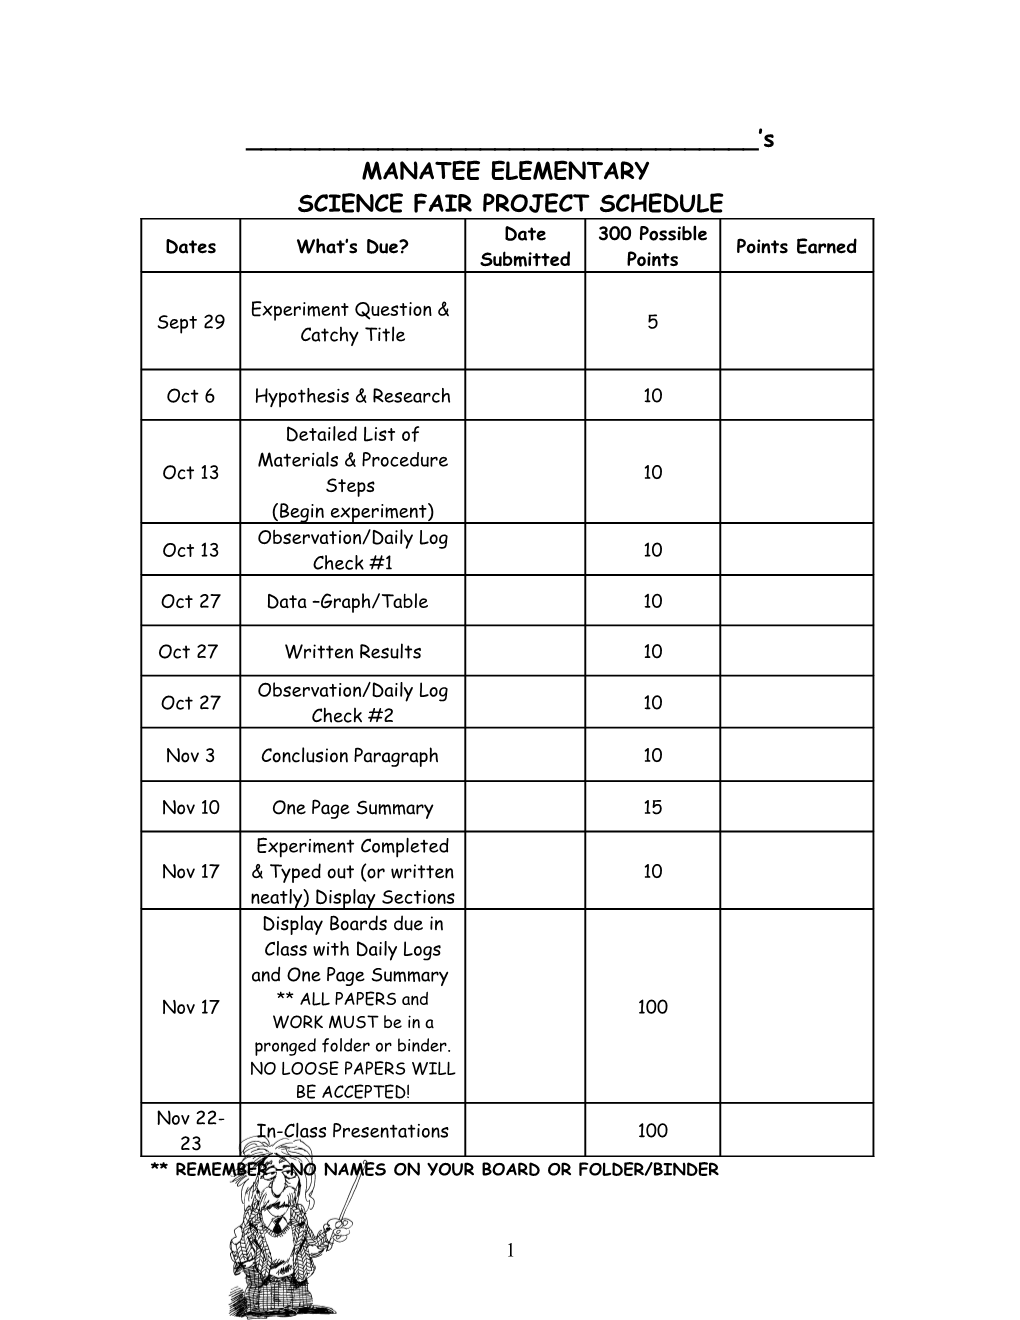 Science Fair Project Schedule